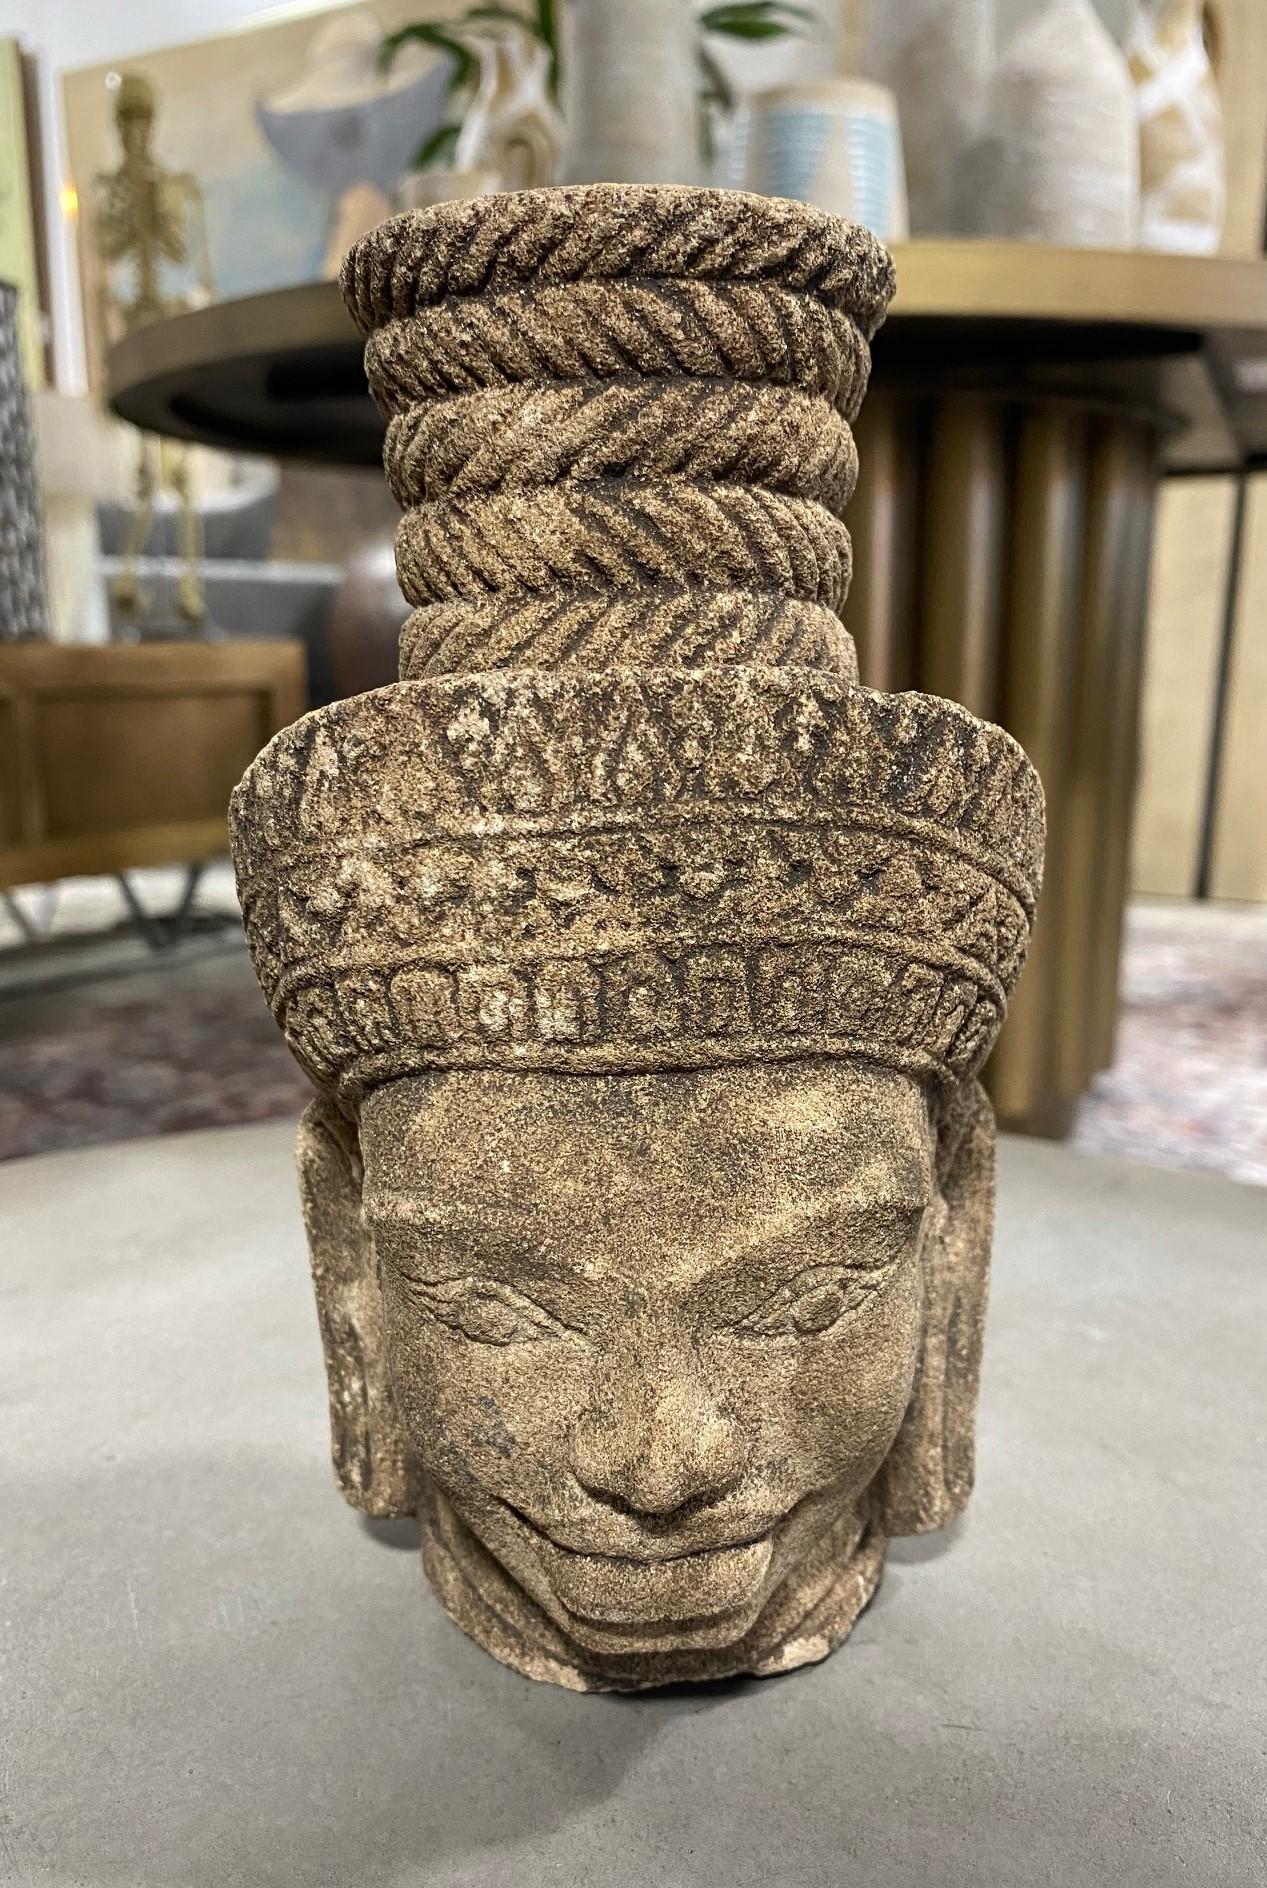 A wonderfully sand stone-carved Asian deity figure / sculpture likely from Cambodia. The detailed head is likely that of the divinity deity Shiva, sometimes referred to as the smiling God-King. The features are clearly reminiscent of the carvings